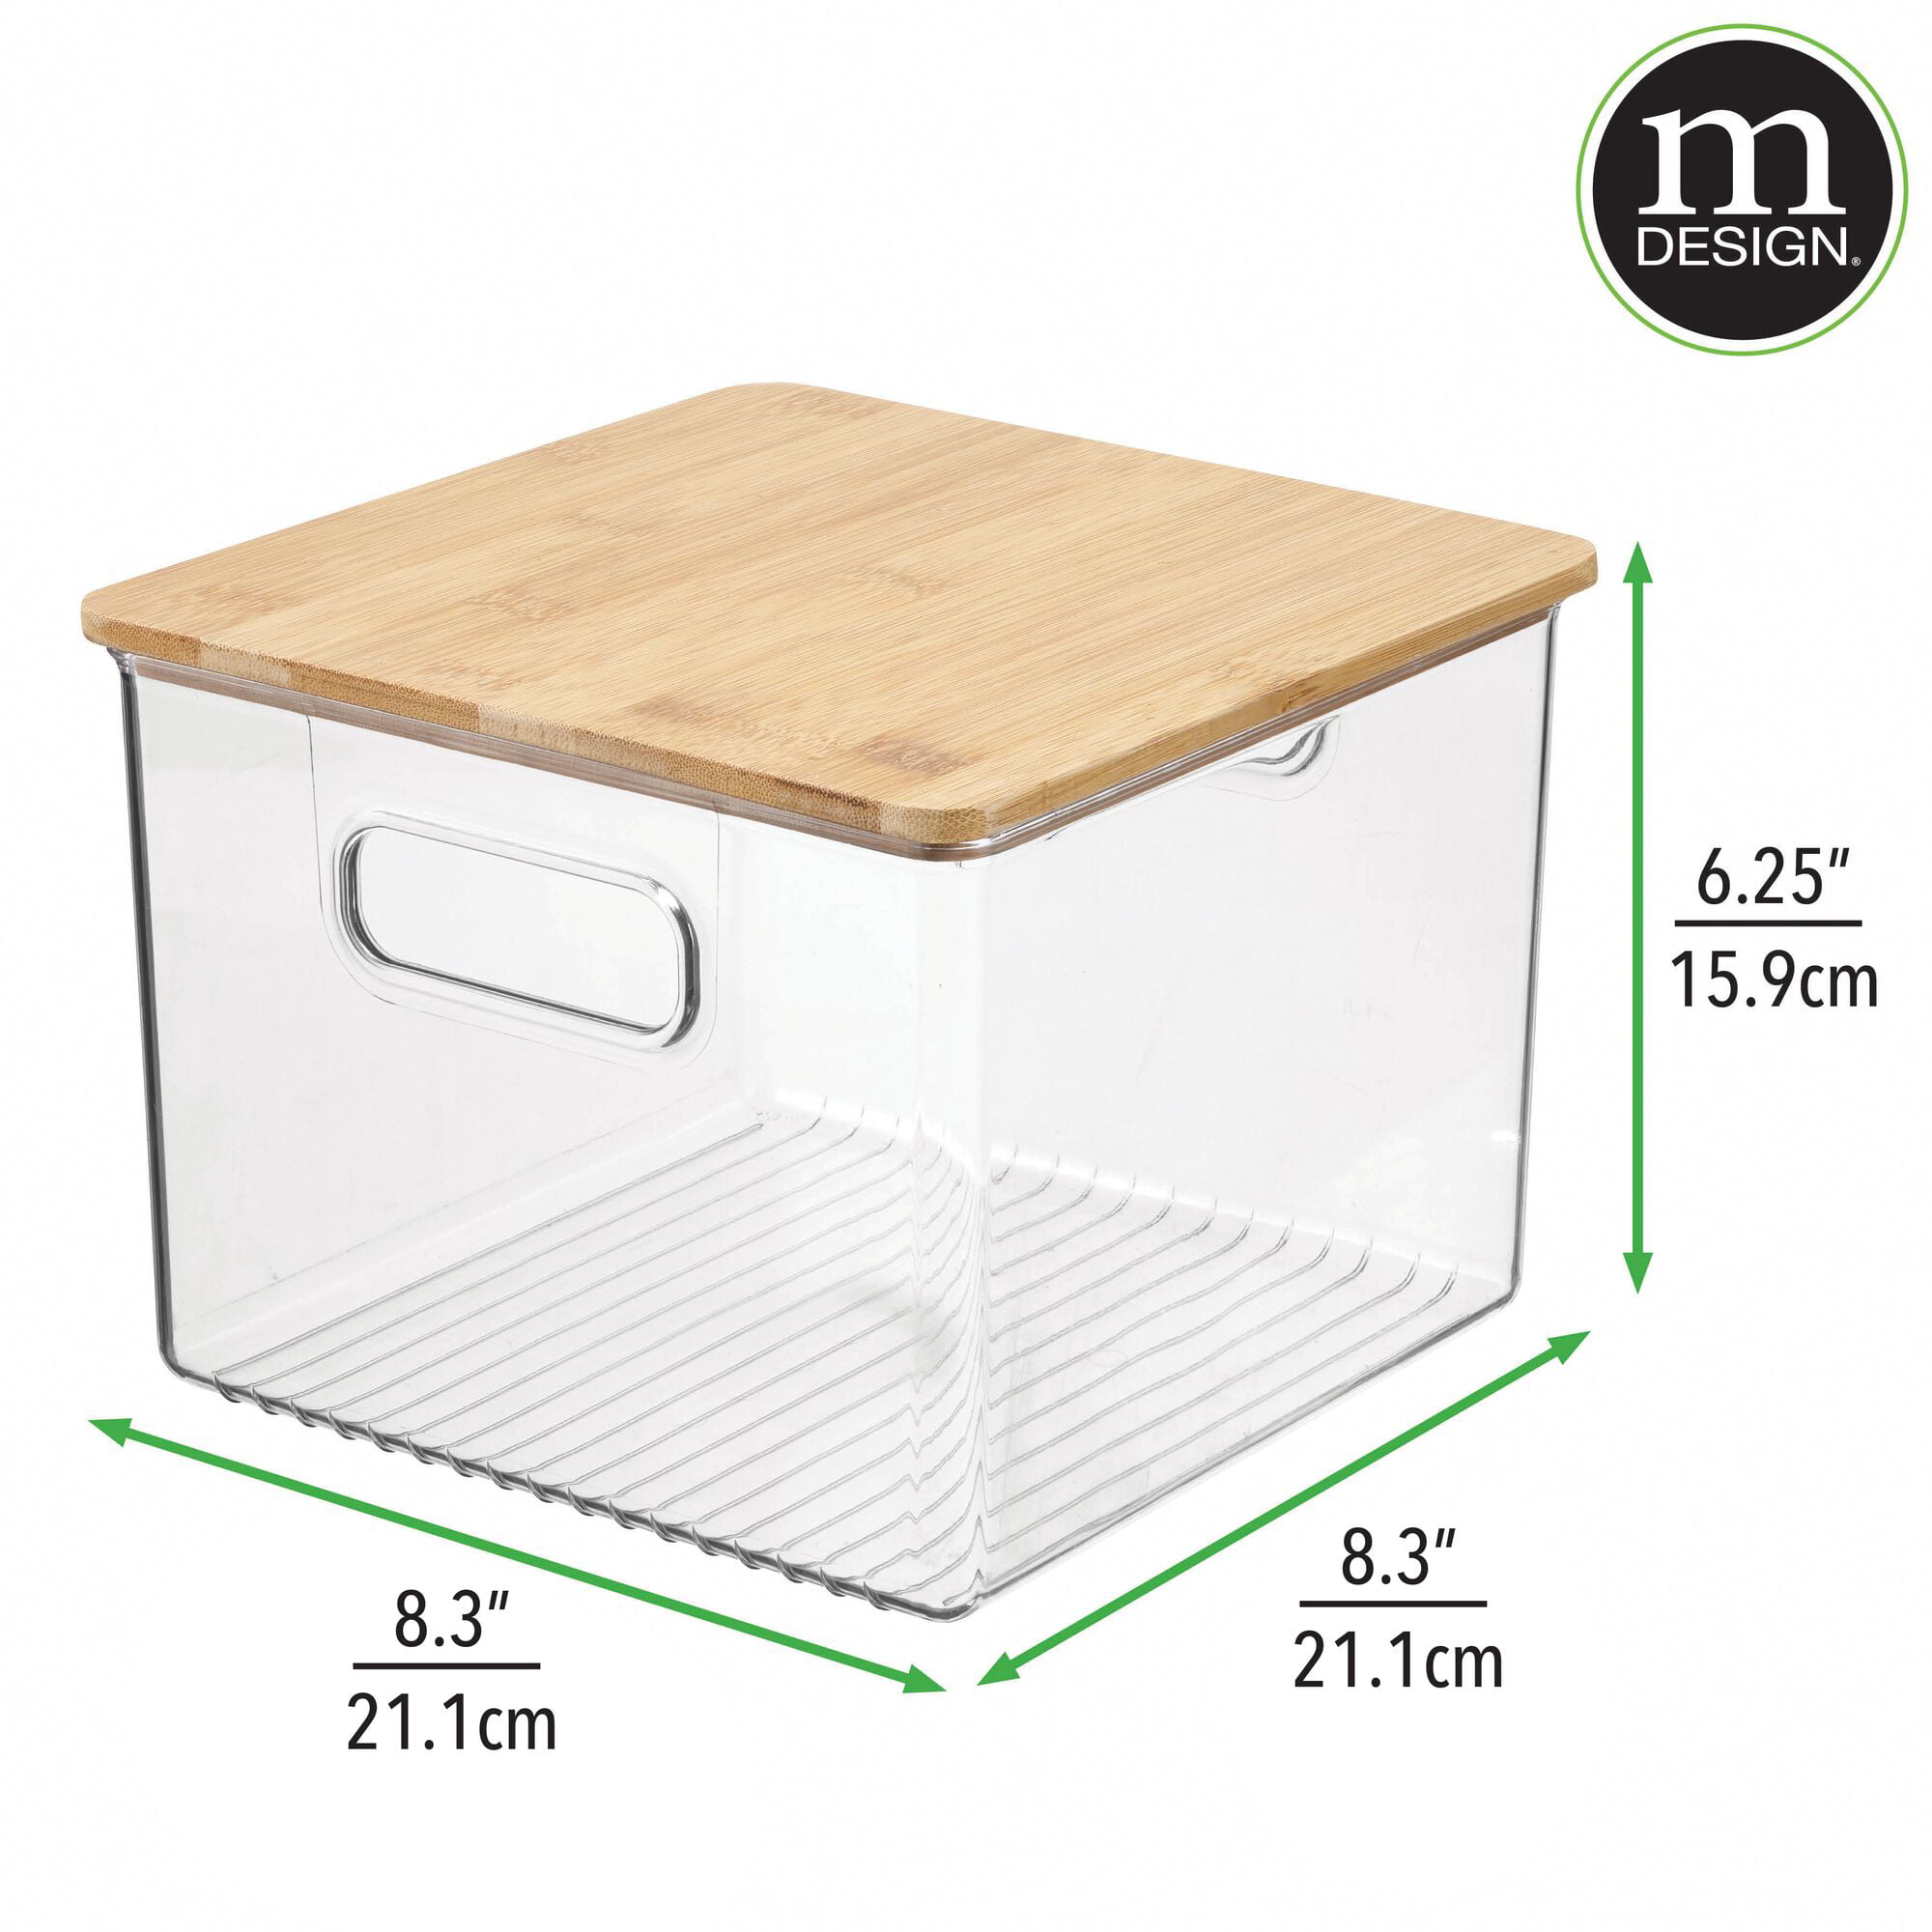 ANMINY 6PCS Clear Plastic Storage Bins Lidded Stackable Basket Box Set with  Bamboo Removable Lid Handle Kitchen Closet Shelf Decorative Kid Toy Cloth